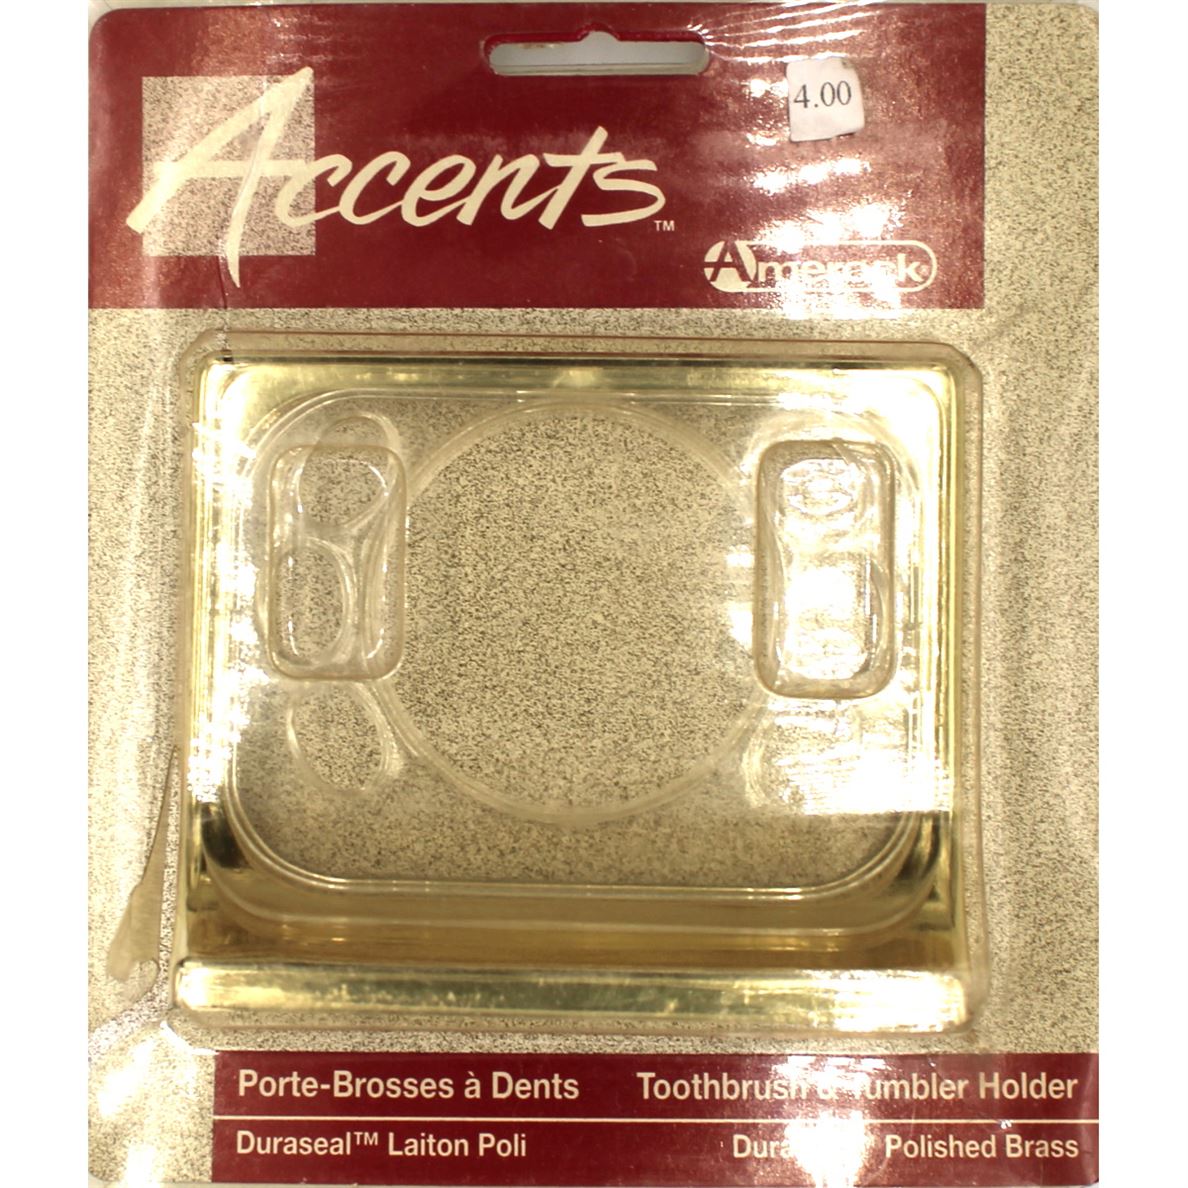 Amerock Accents Polished Brass Clear 4 1/4" Toothbrush And Tumbler Holder 52154